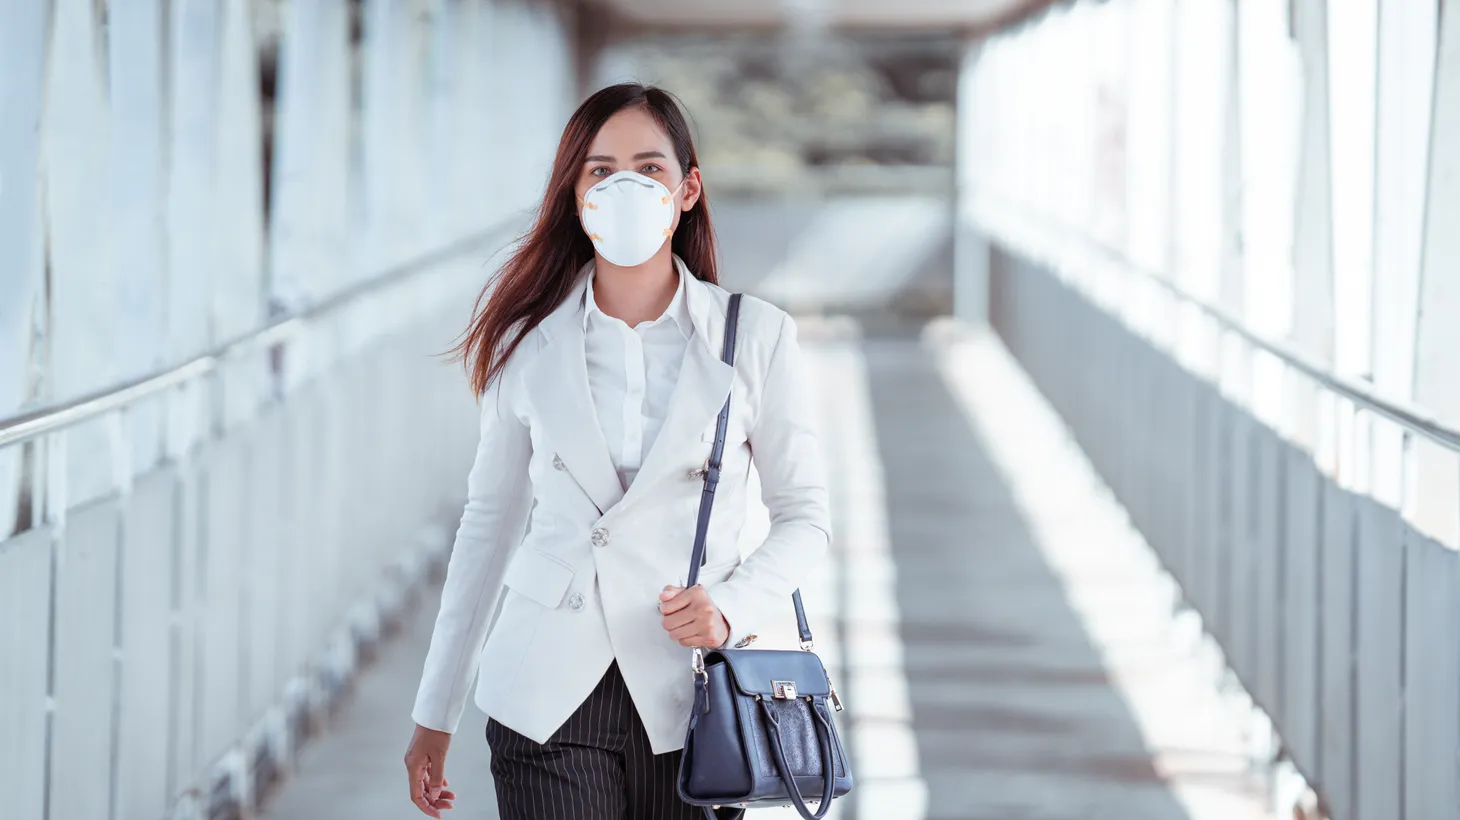 N95, KN95, and KF94 masks differ in where they’re tested and approved, and what type of straps they have, says Dr. Abraar Karan, infectious disease physician at Stanford University.